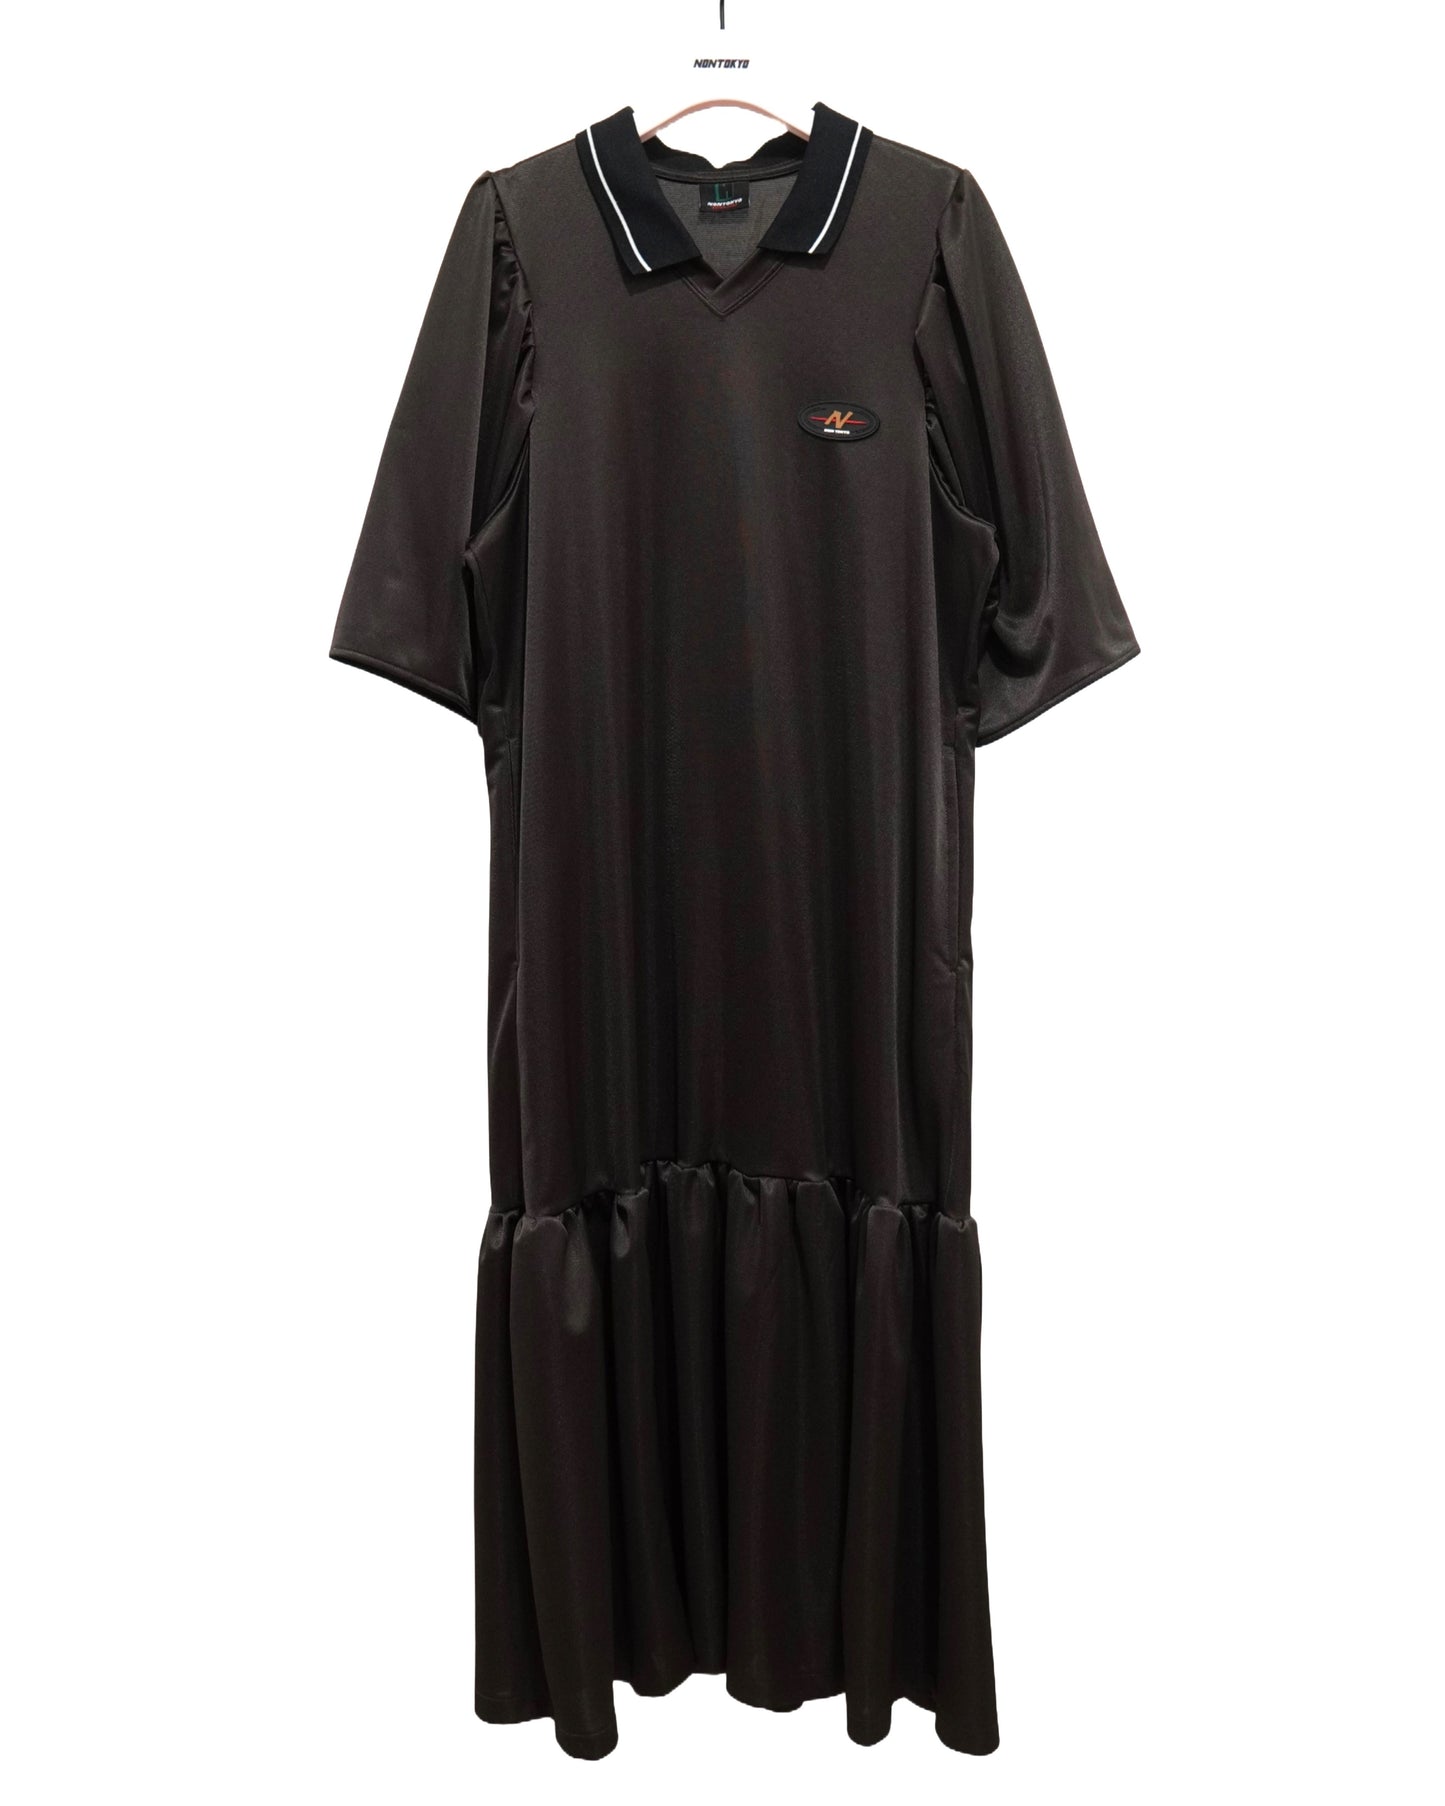 NON TOKYO /  FLARE SLEEVE SOCCER SHIRT ONE-PIECE (BROWN) / 〈ノントーキョー〉フレアスリーブシアサッカーシャツワンピース (ブラウン)